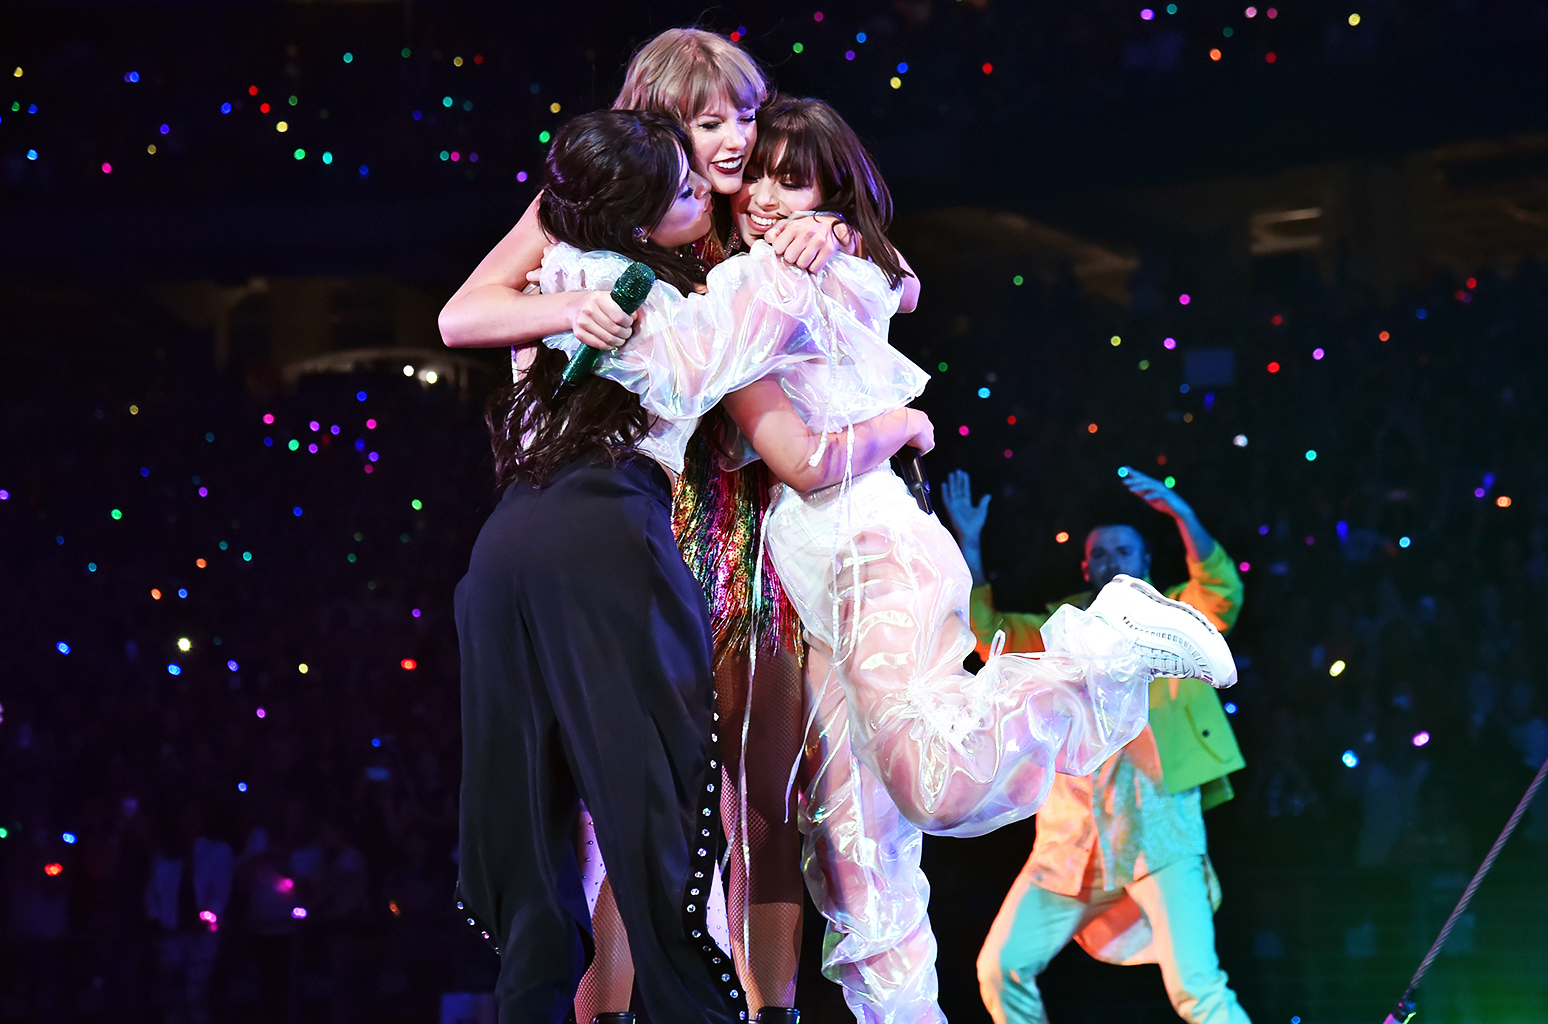 Taylor Swift's Reputation Tour: Twitter Reactions